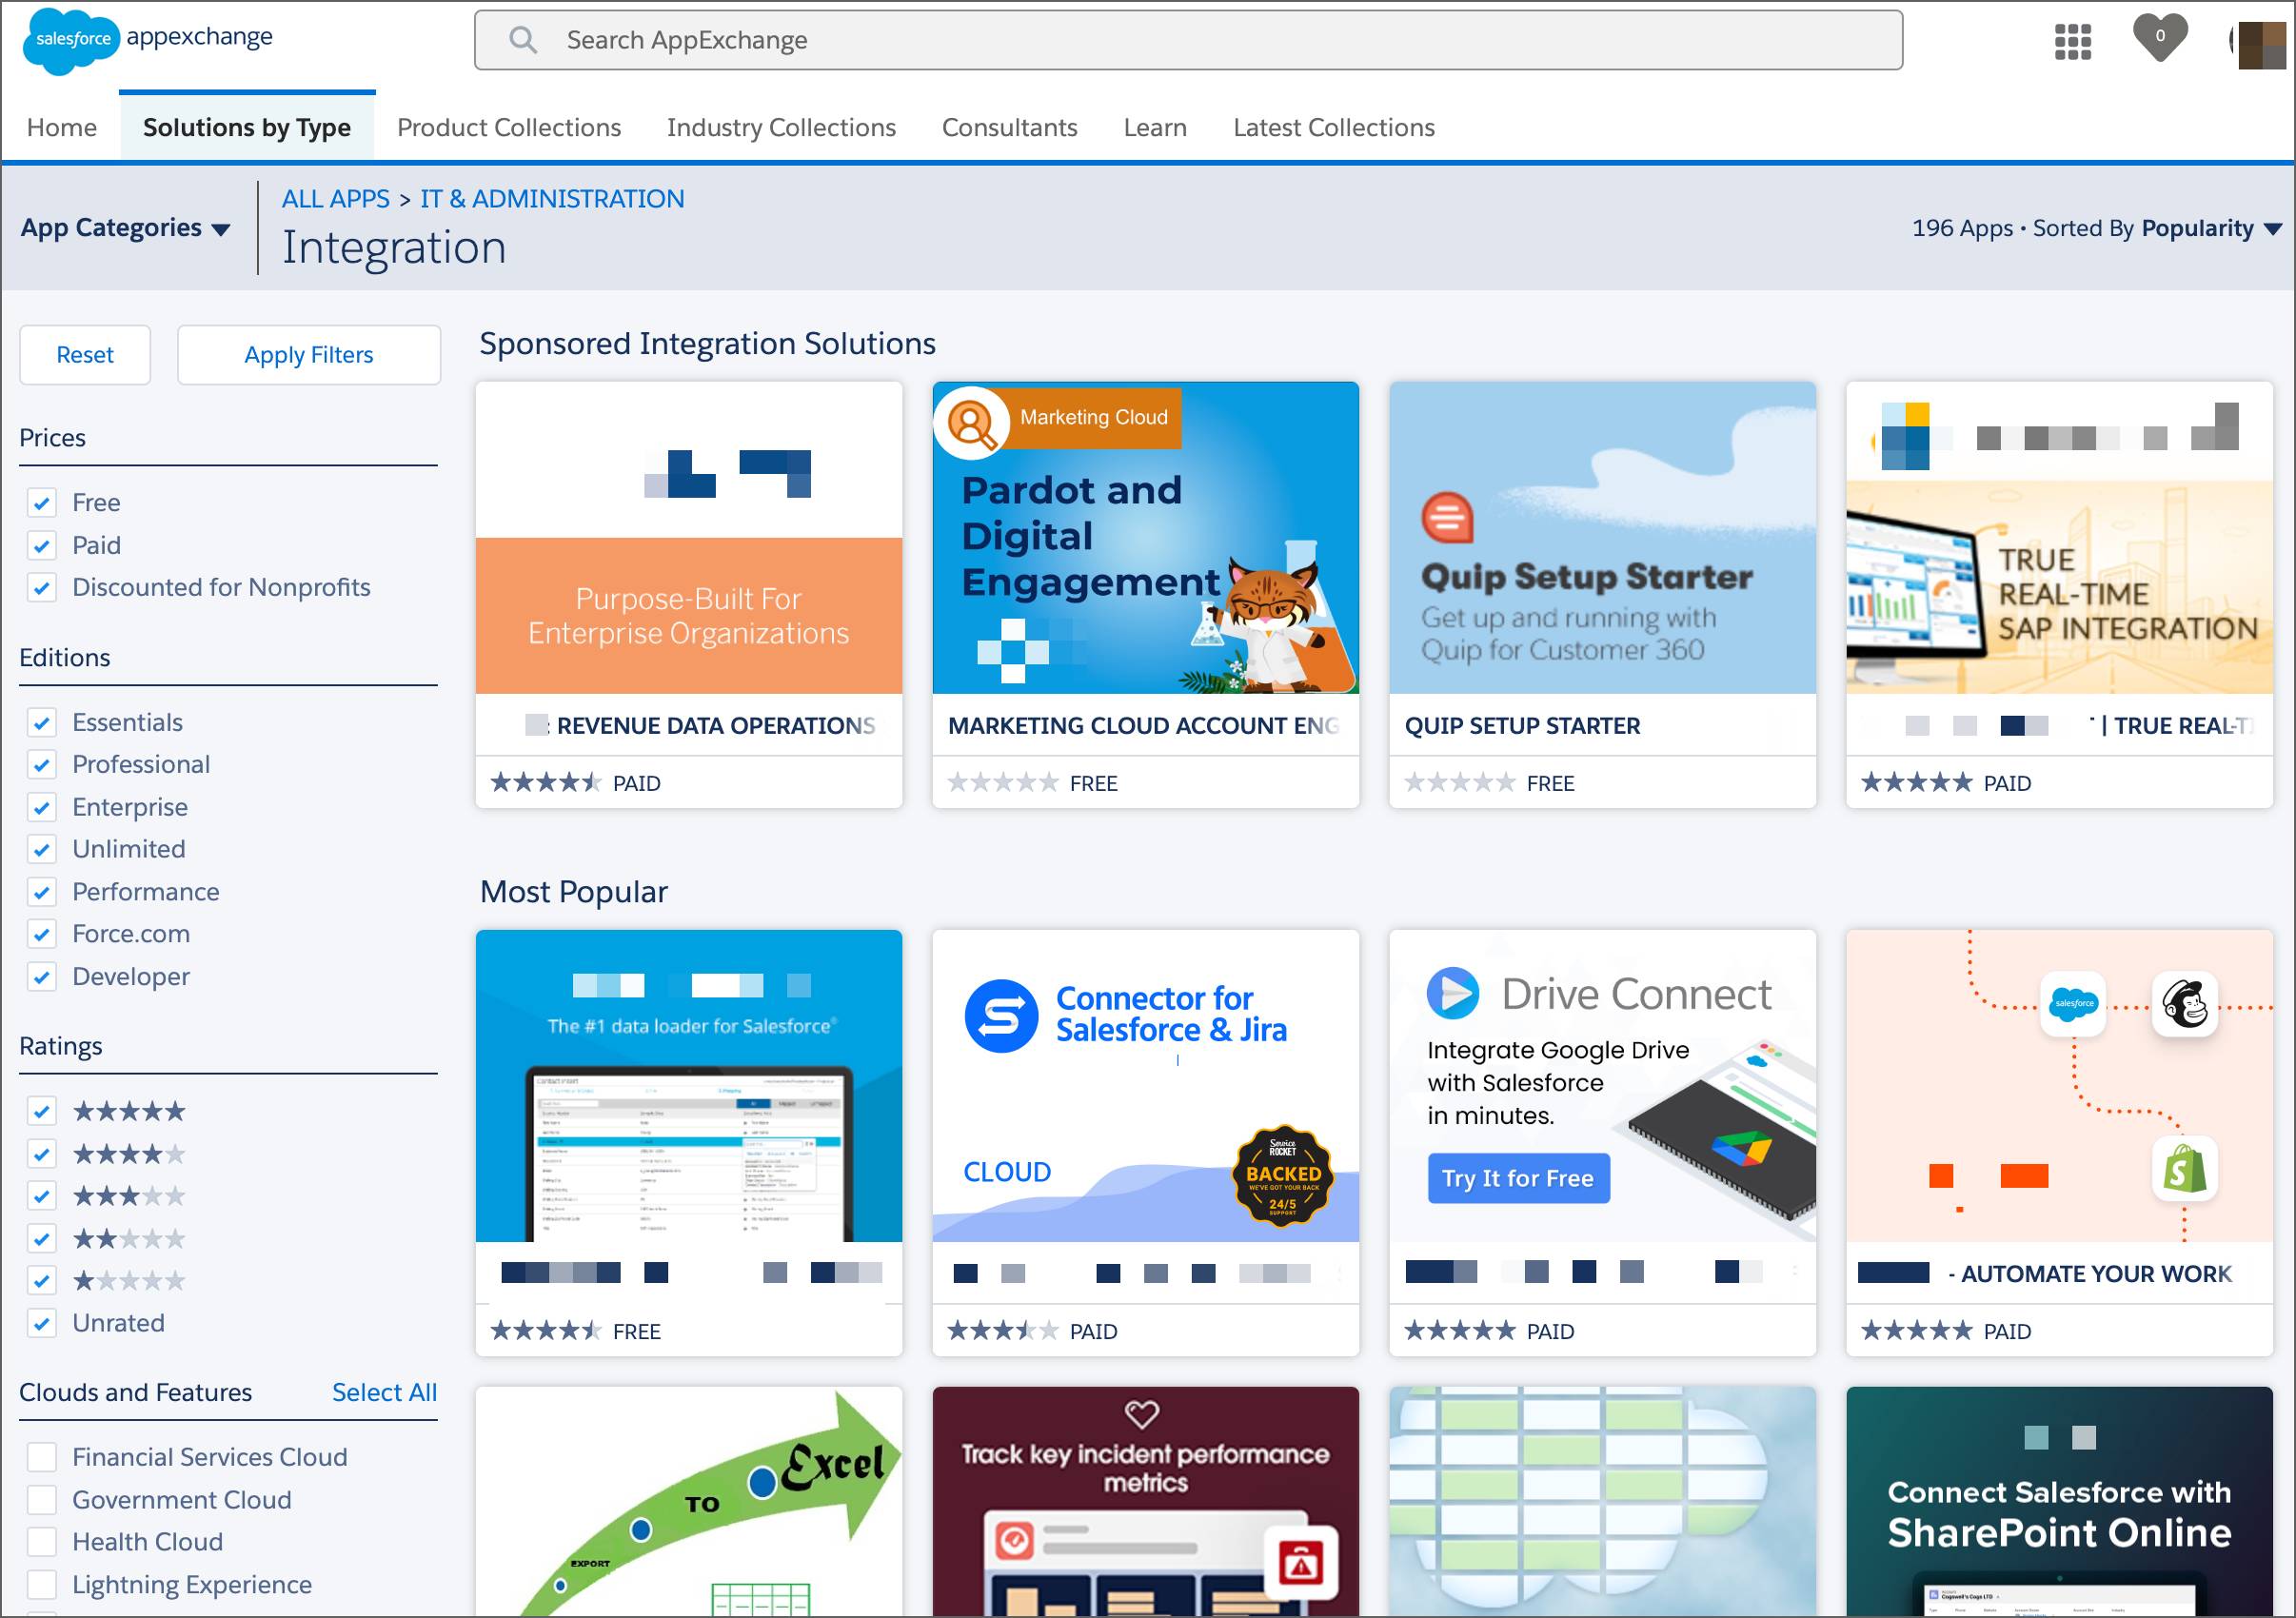 The AppExchange homepage.